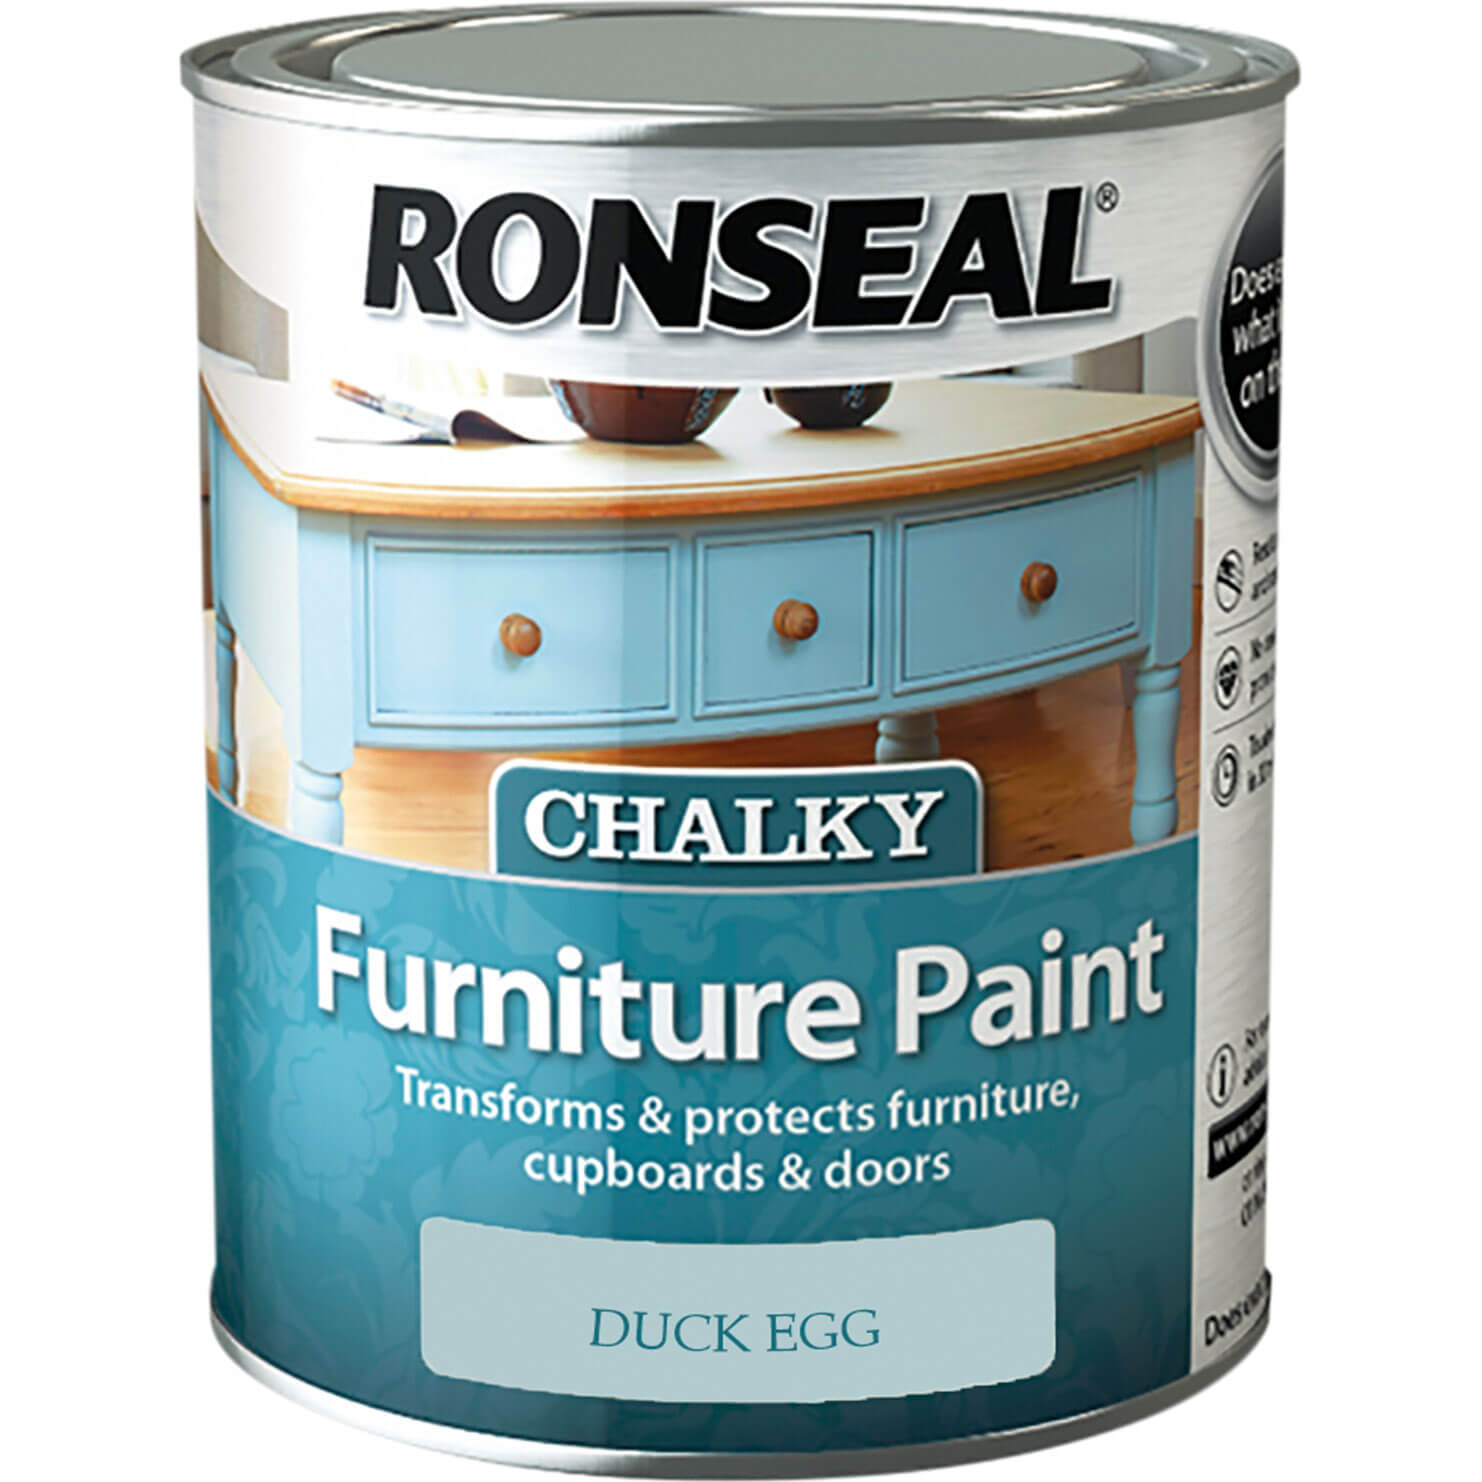 Image of Ronseal Chalky Furniture Paint Duck Egg 750ml